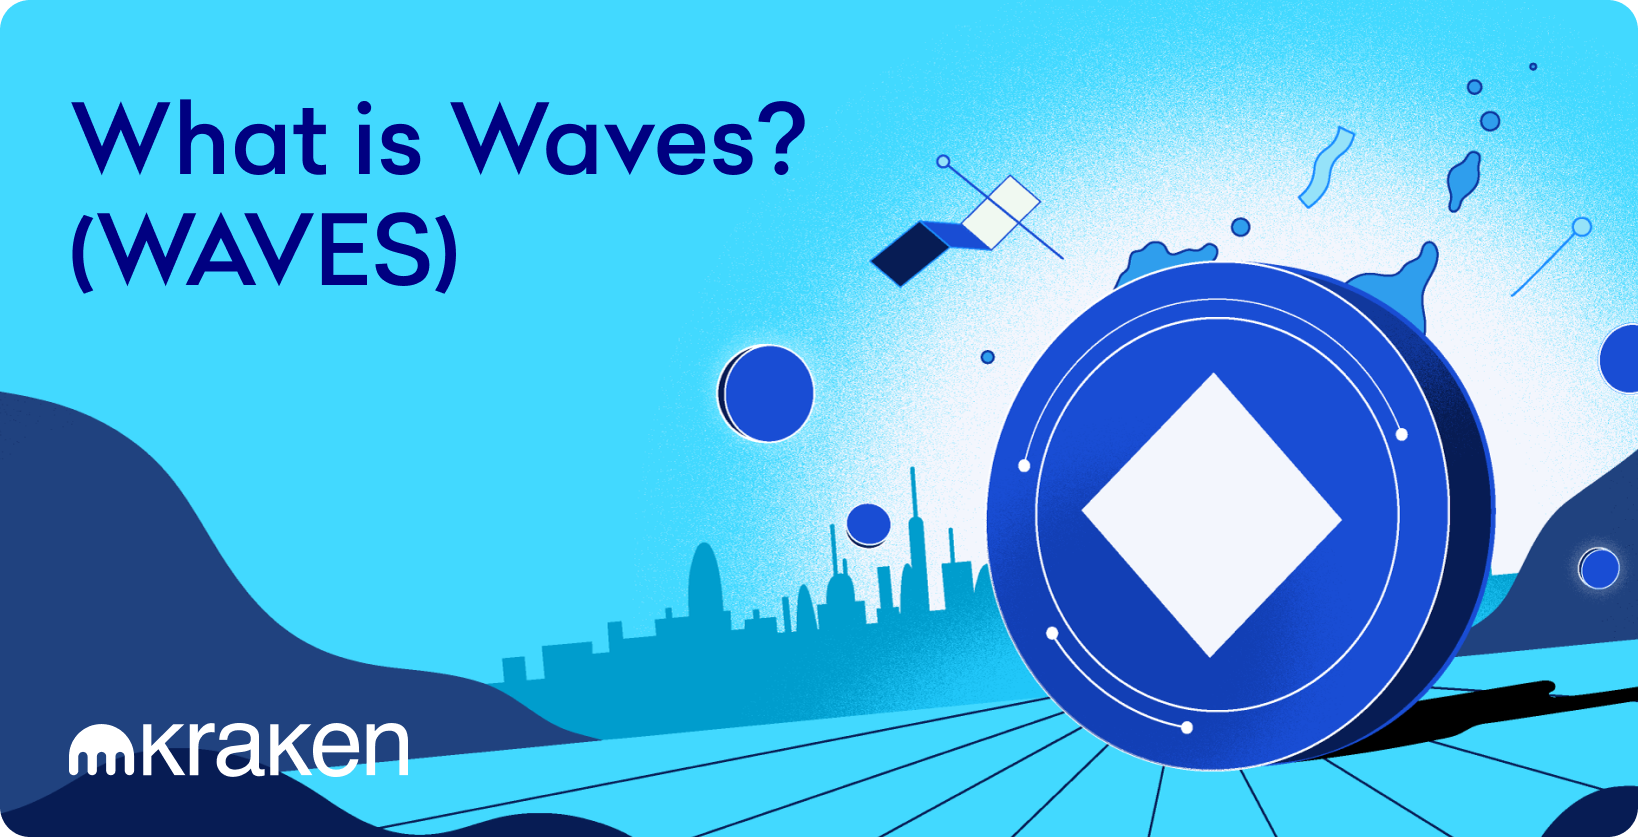 Waves (WAVES) Price Prediction - 